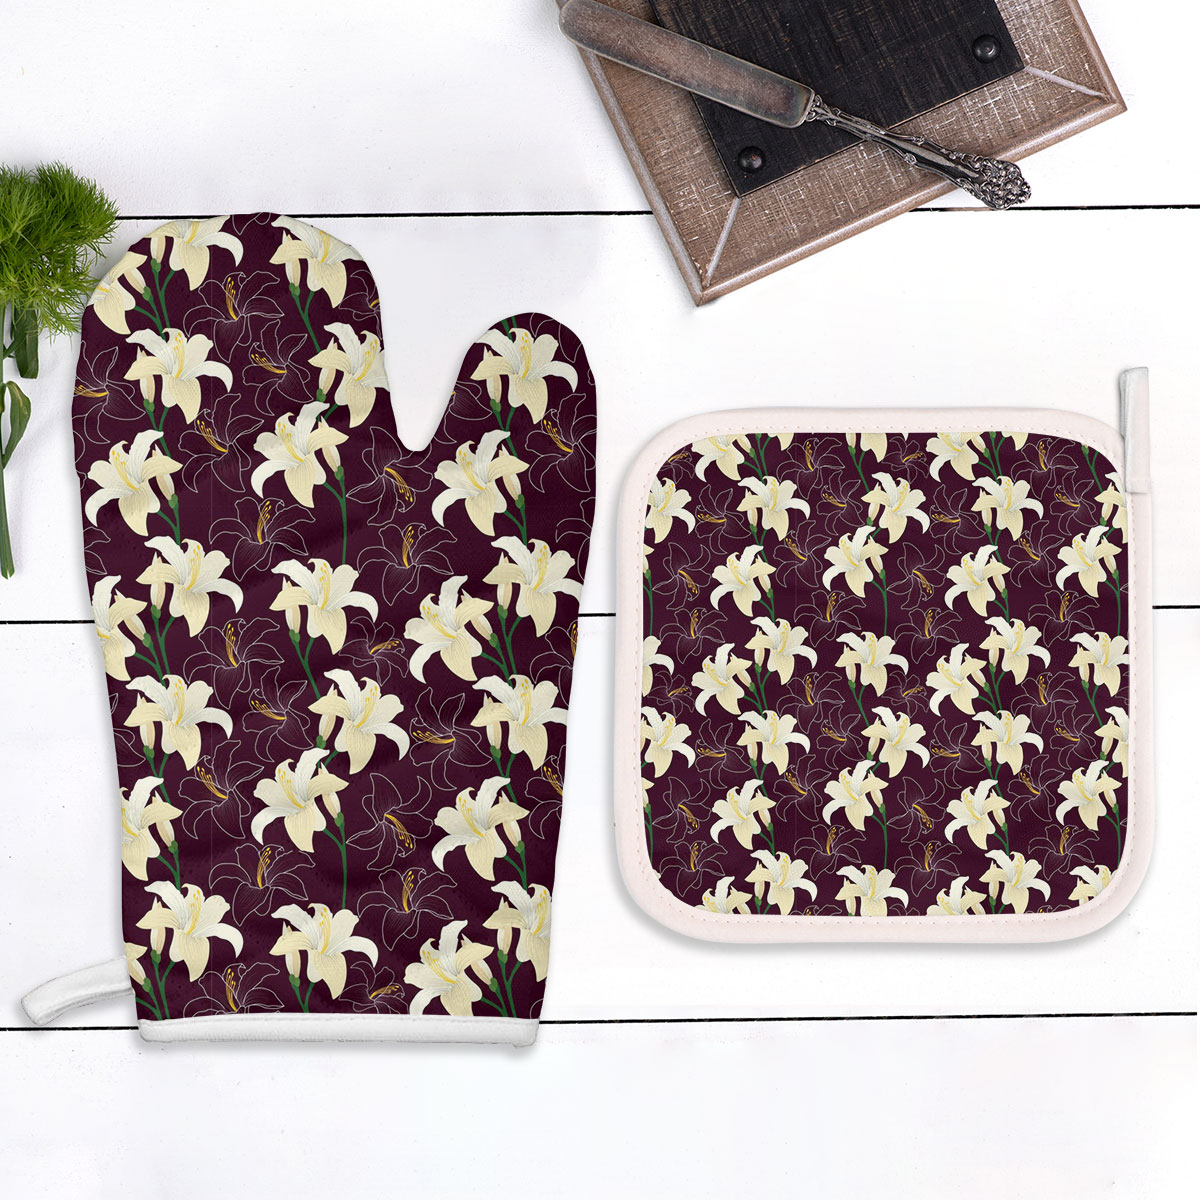 White Lily Seamless Pattern Oven Mitts Pot Holder Set